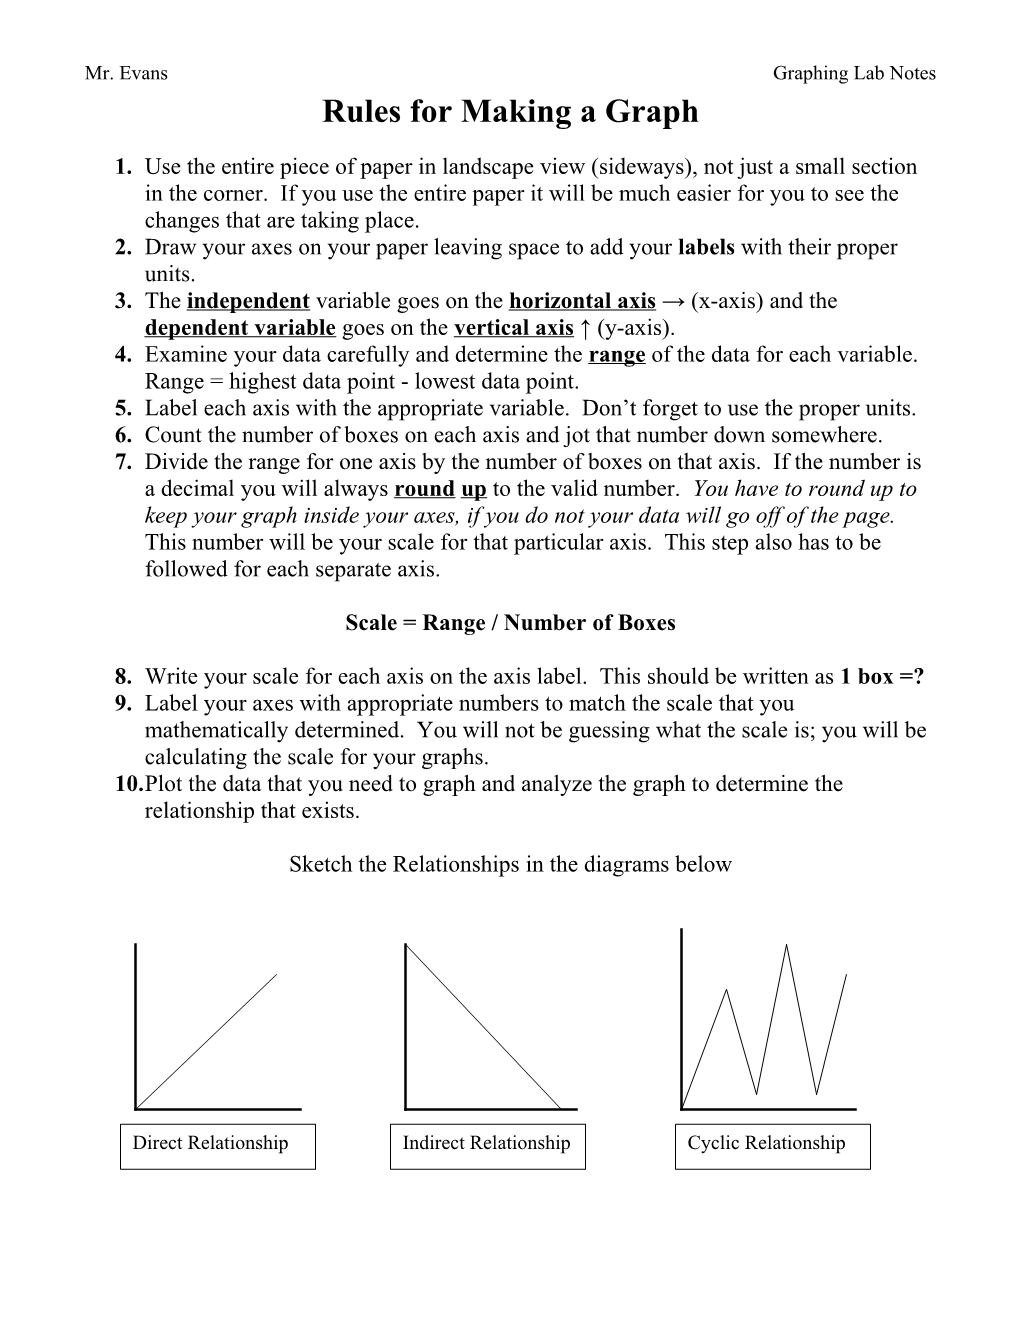 Rules for Making a Graph